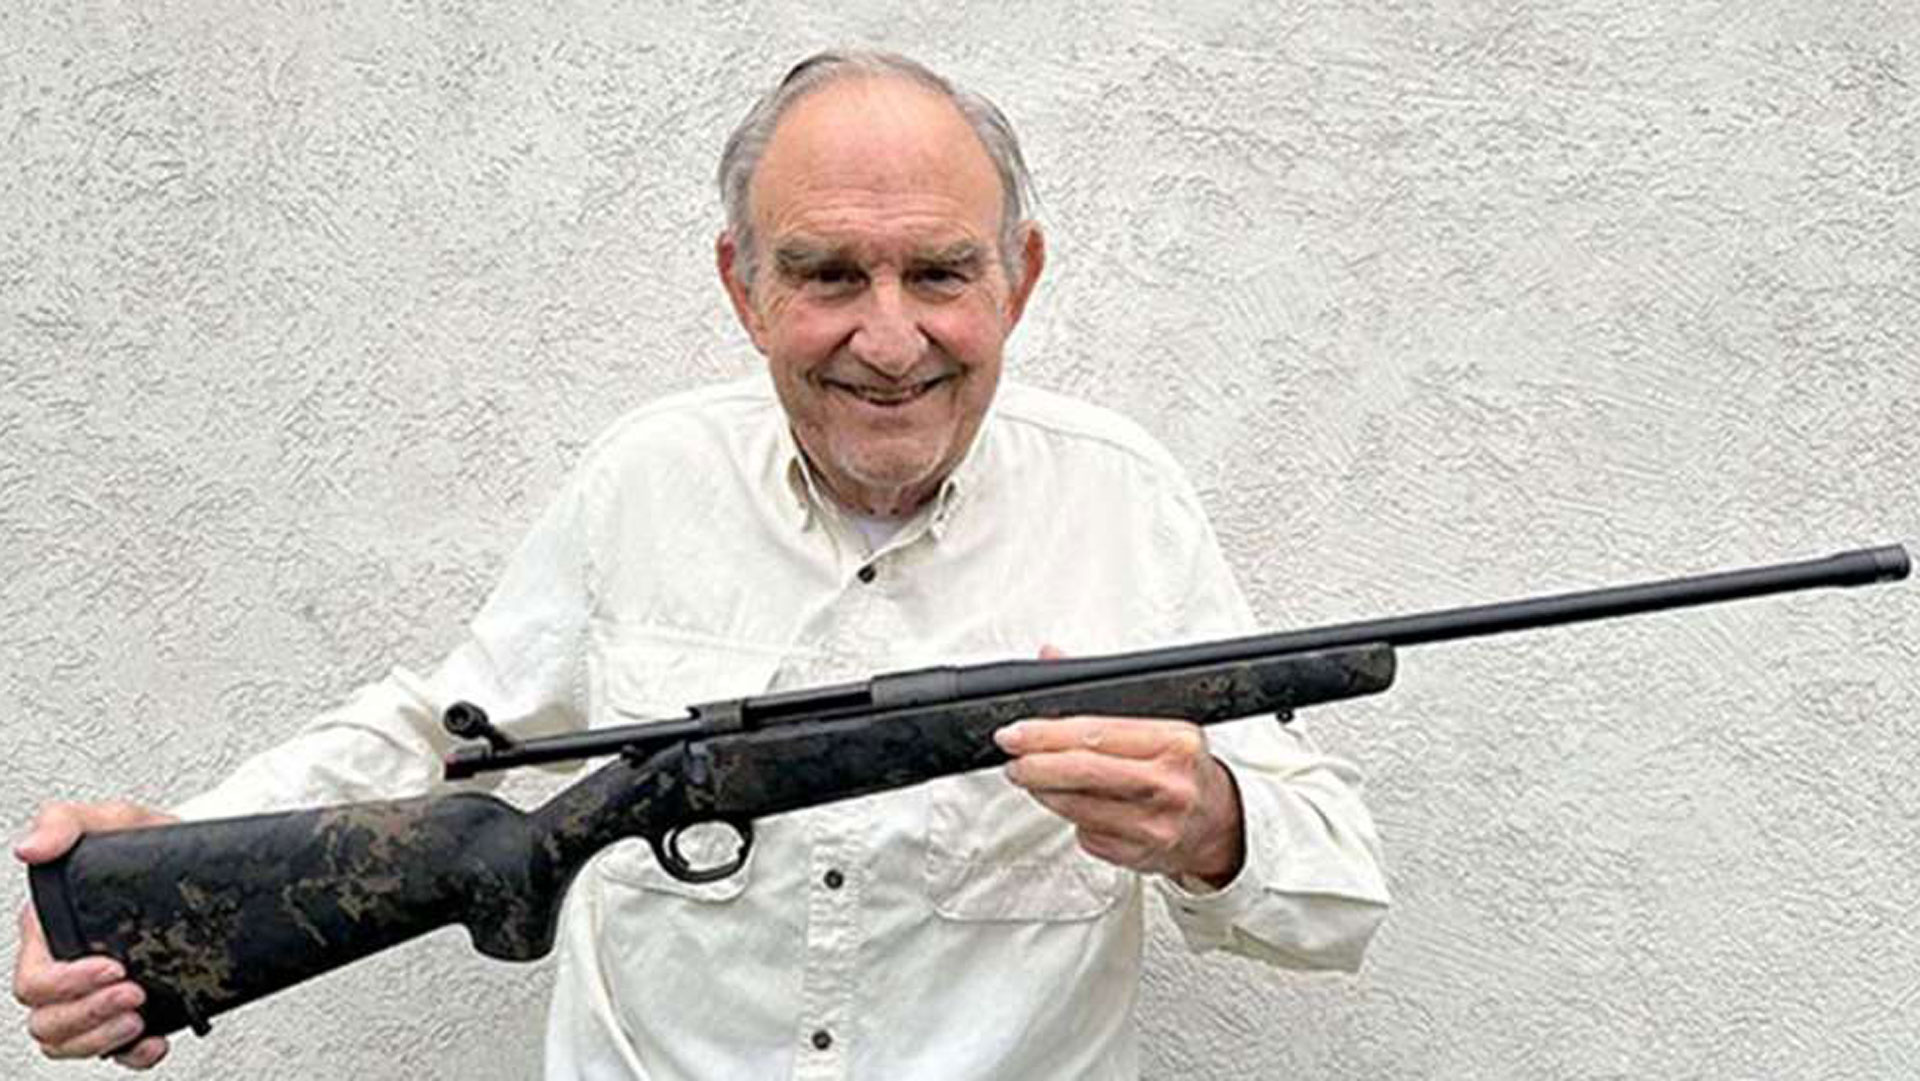 Melvin Forbes, designer of the famous Mountain Rifle Model 20, dies at the age of 77